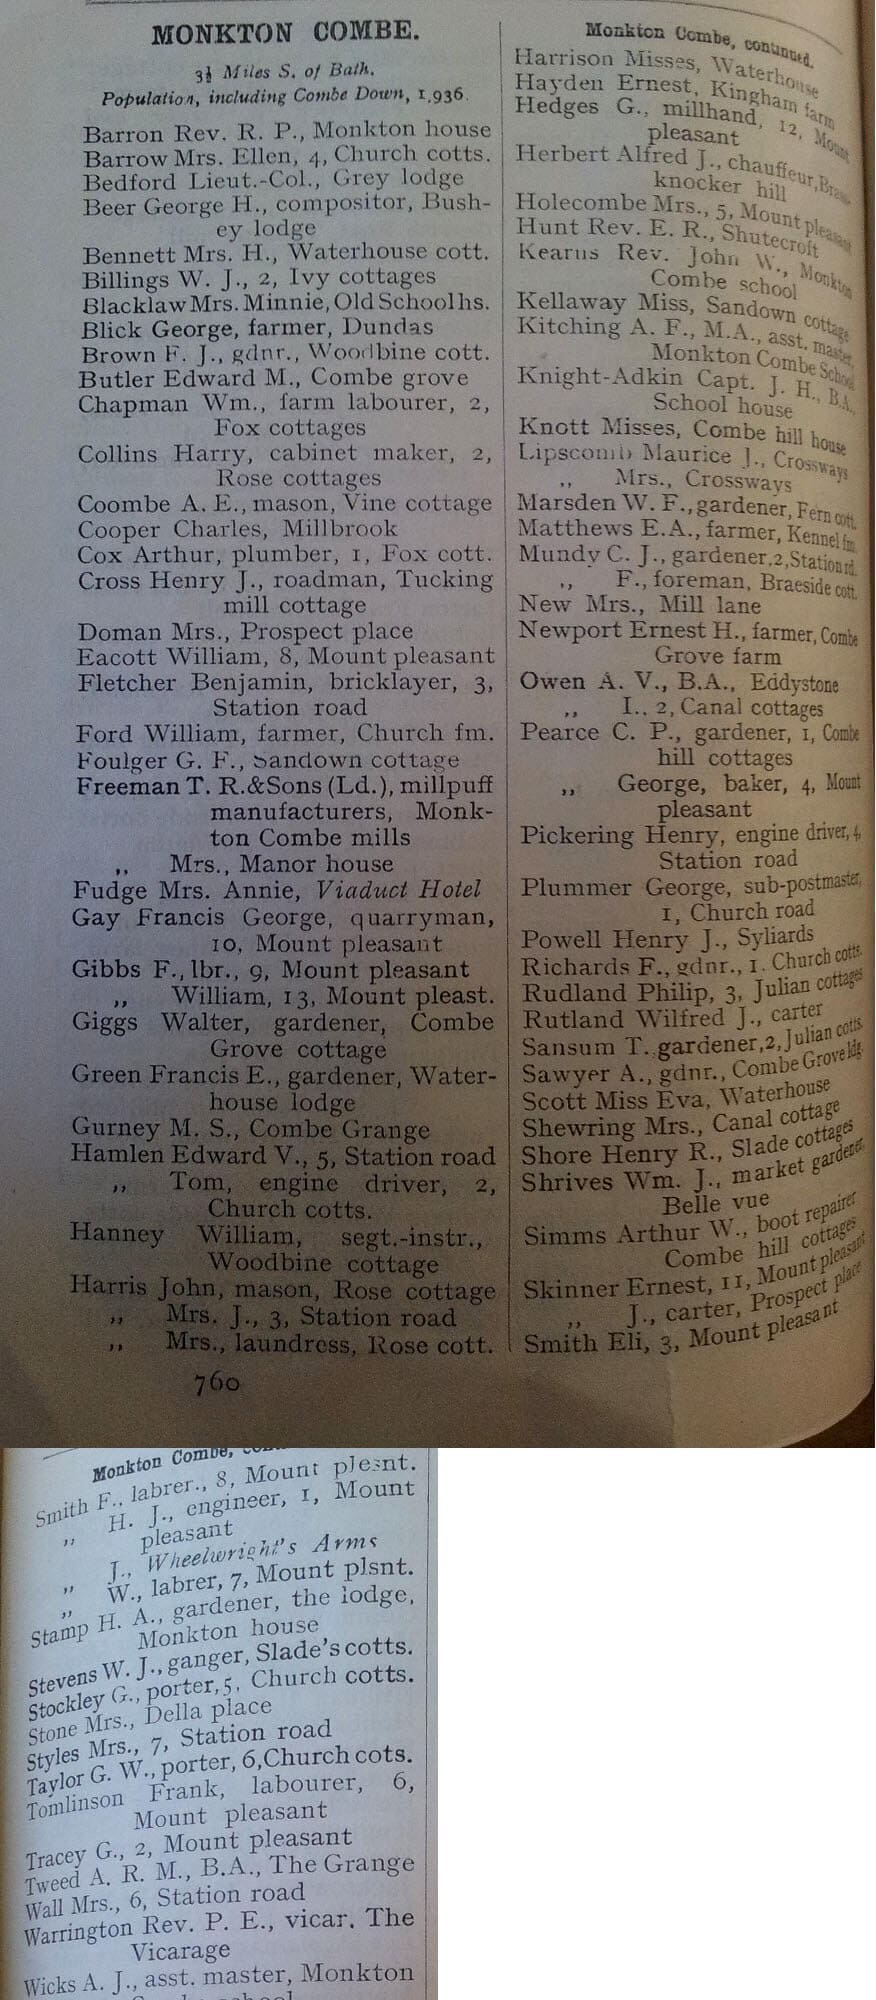 1923 post office directory for monkton combe